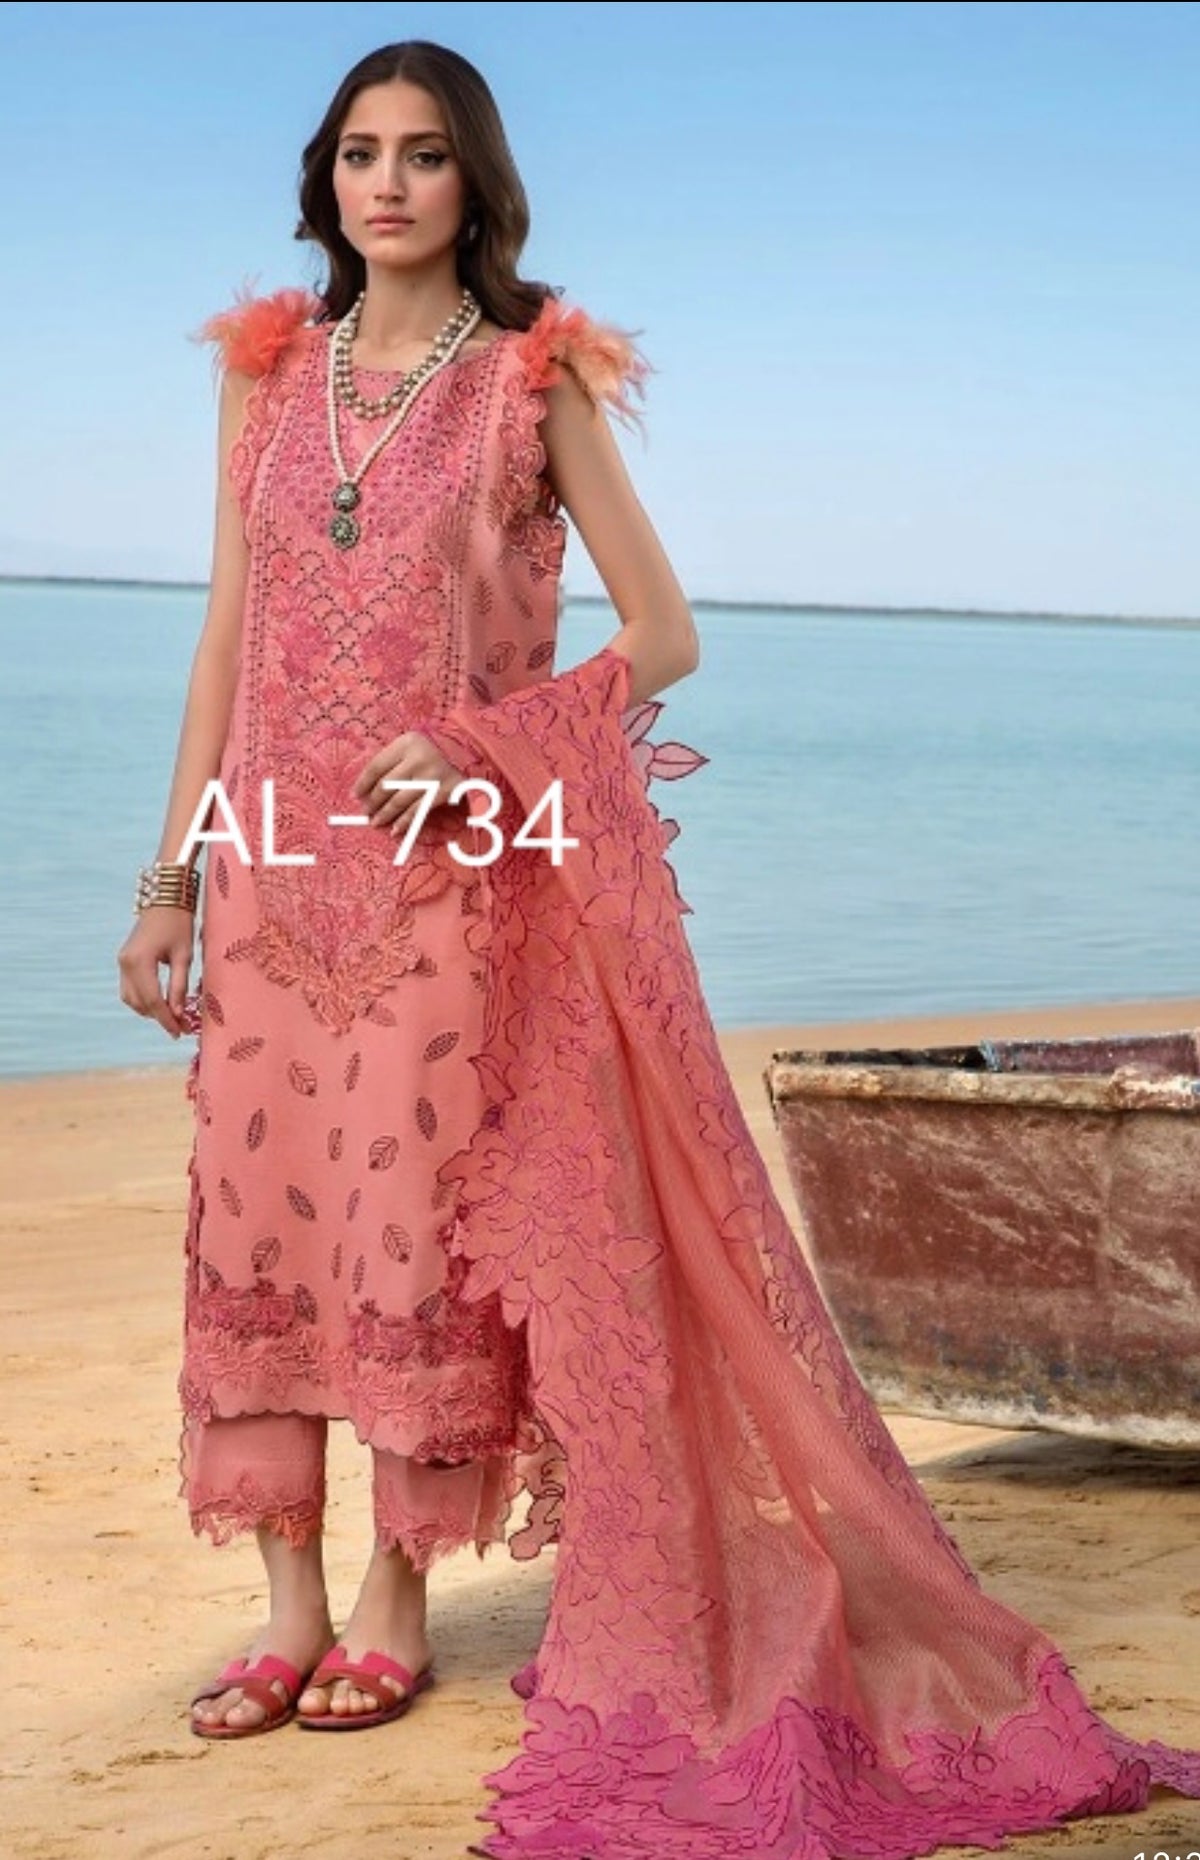 SIMRANS Mb inspired 3 piece lawn embroidered PINK suit MB763-PINk